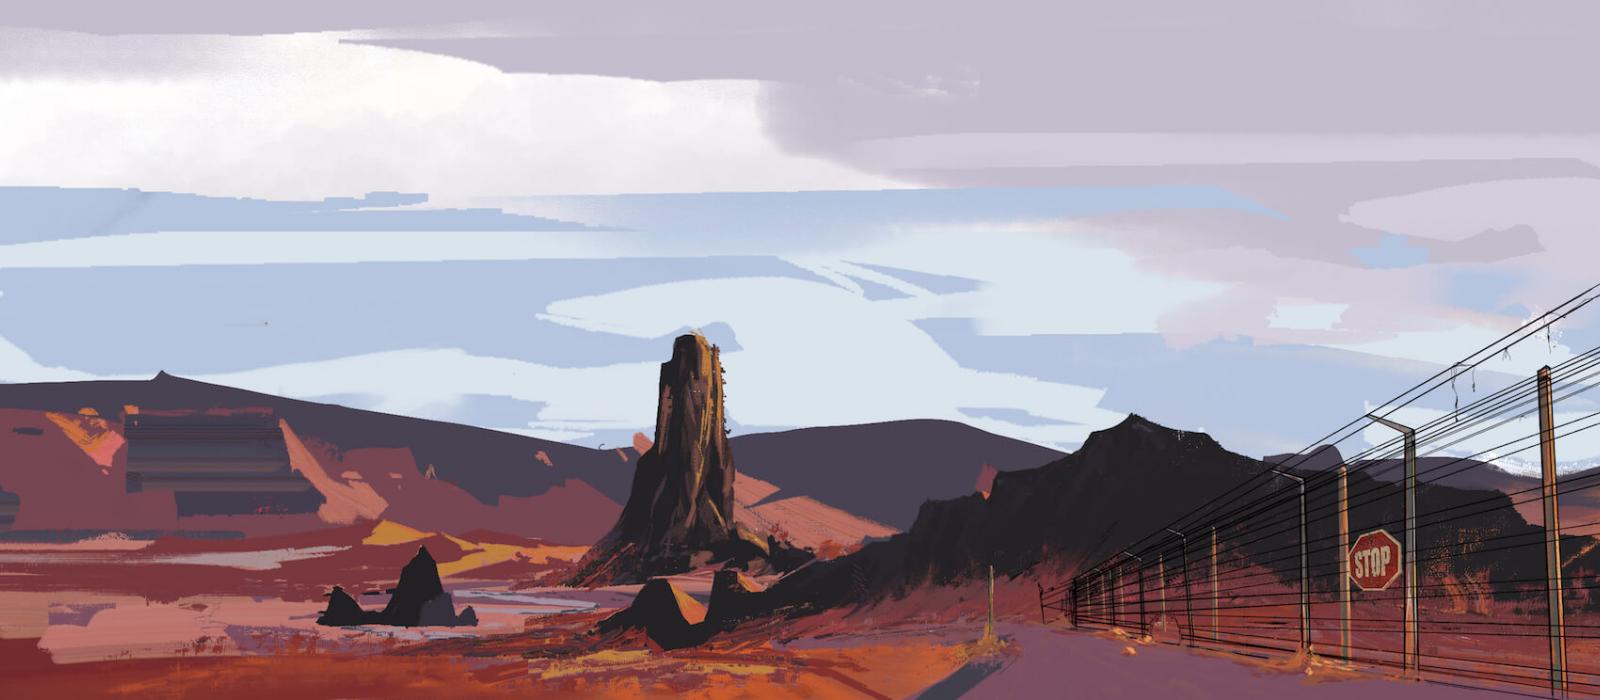 Animation drawing of desert mountain landscape